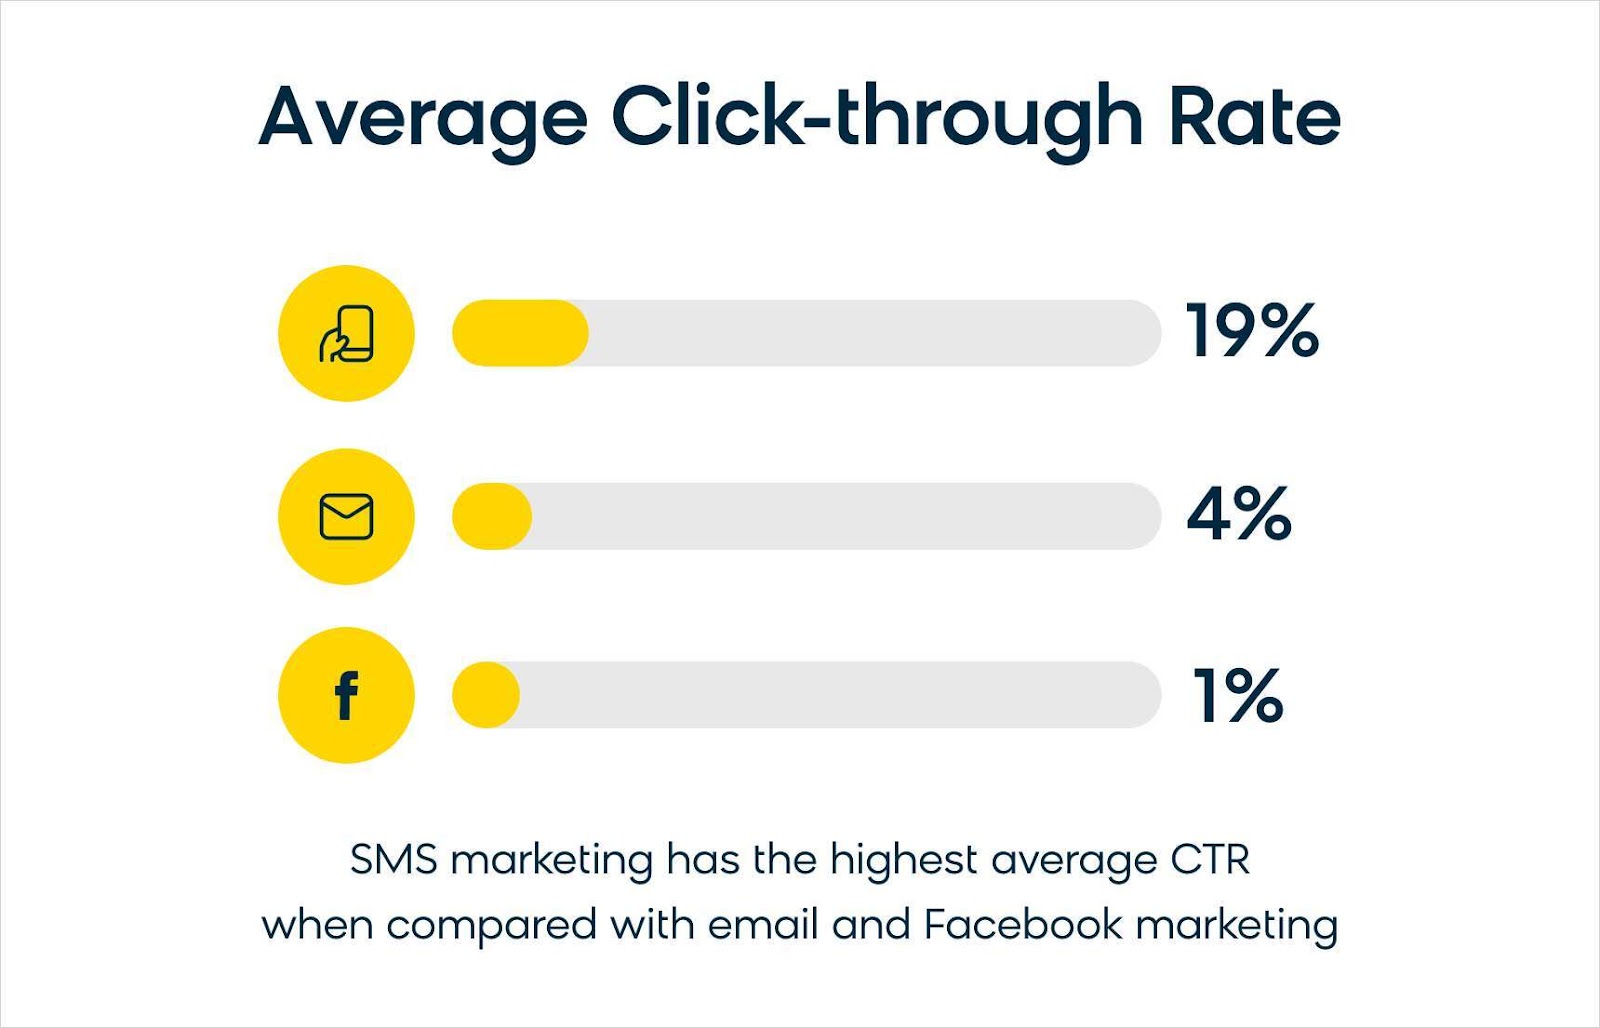 SMS marketing yields an impressive click-through rate (CTR) of 19%.